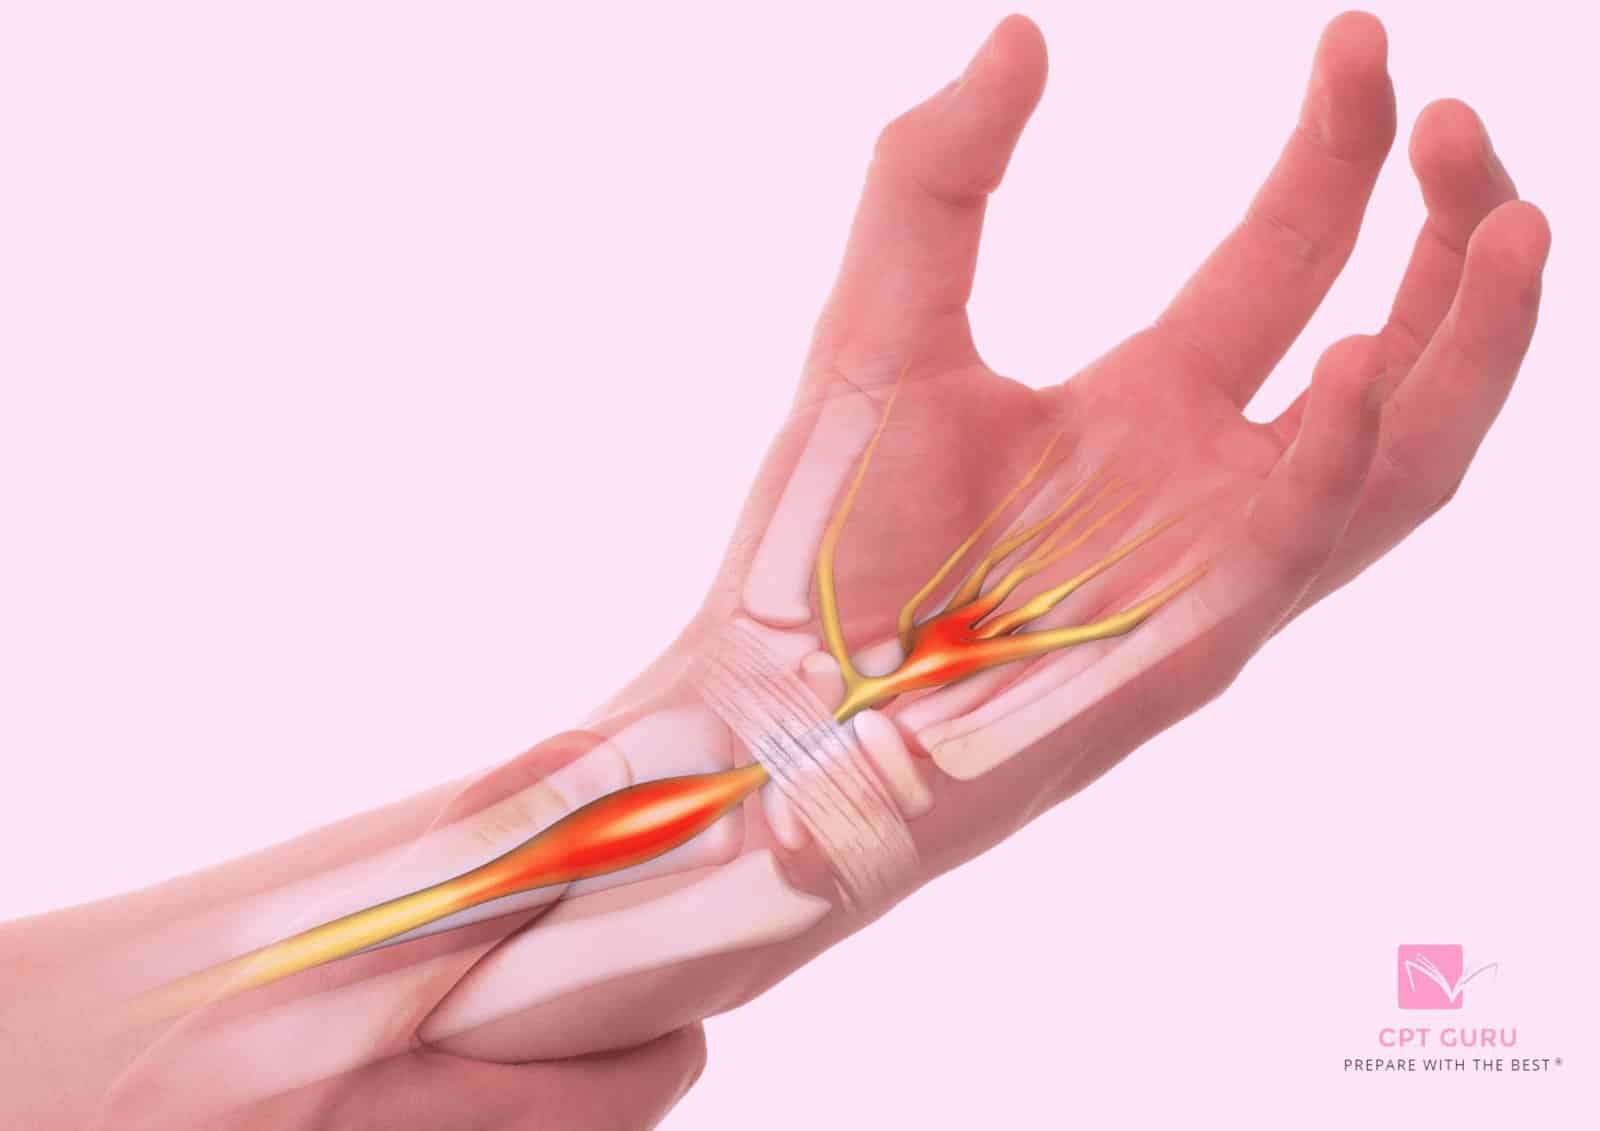 Carpel tunnel syndrome 